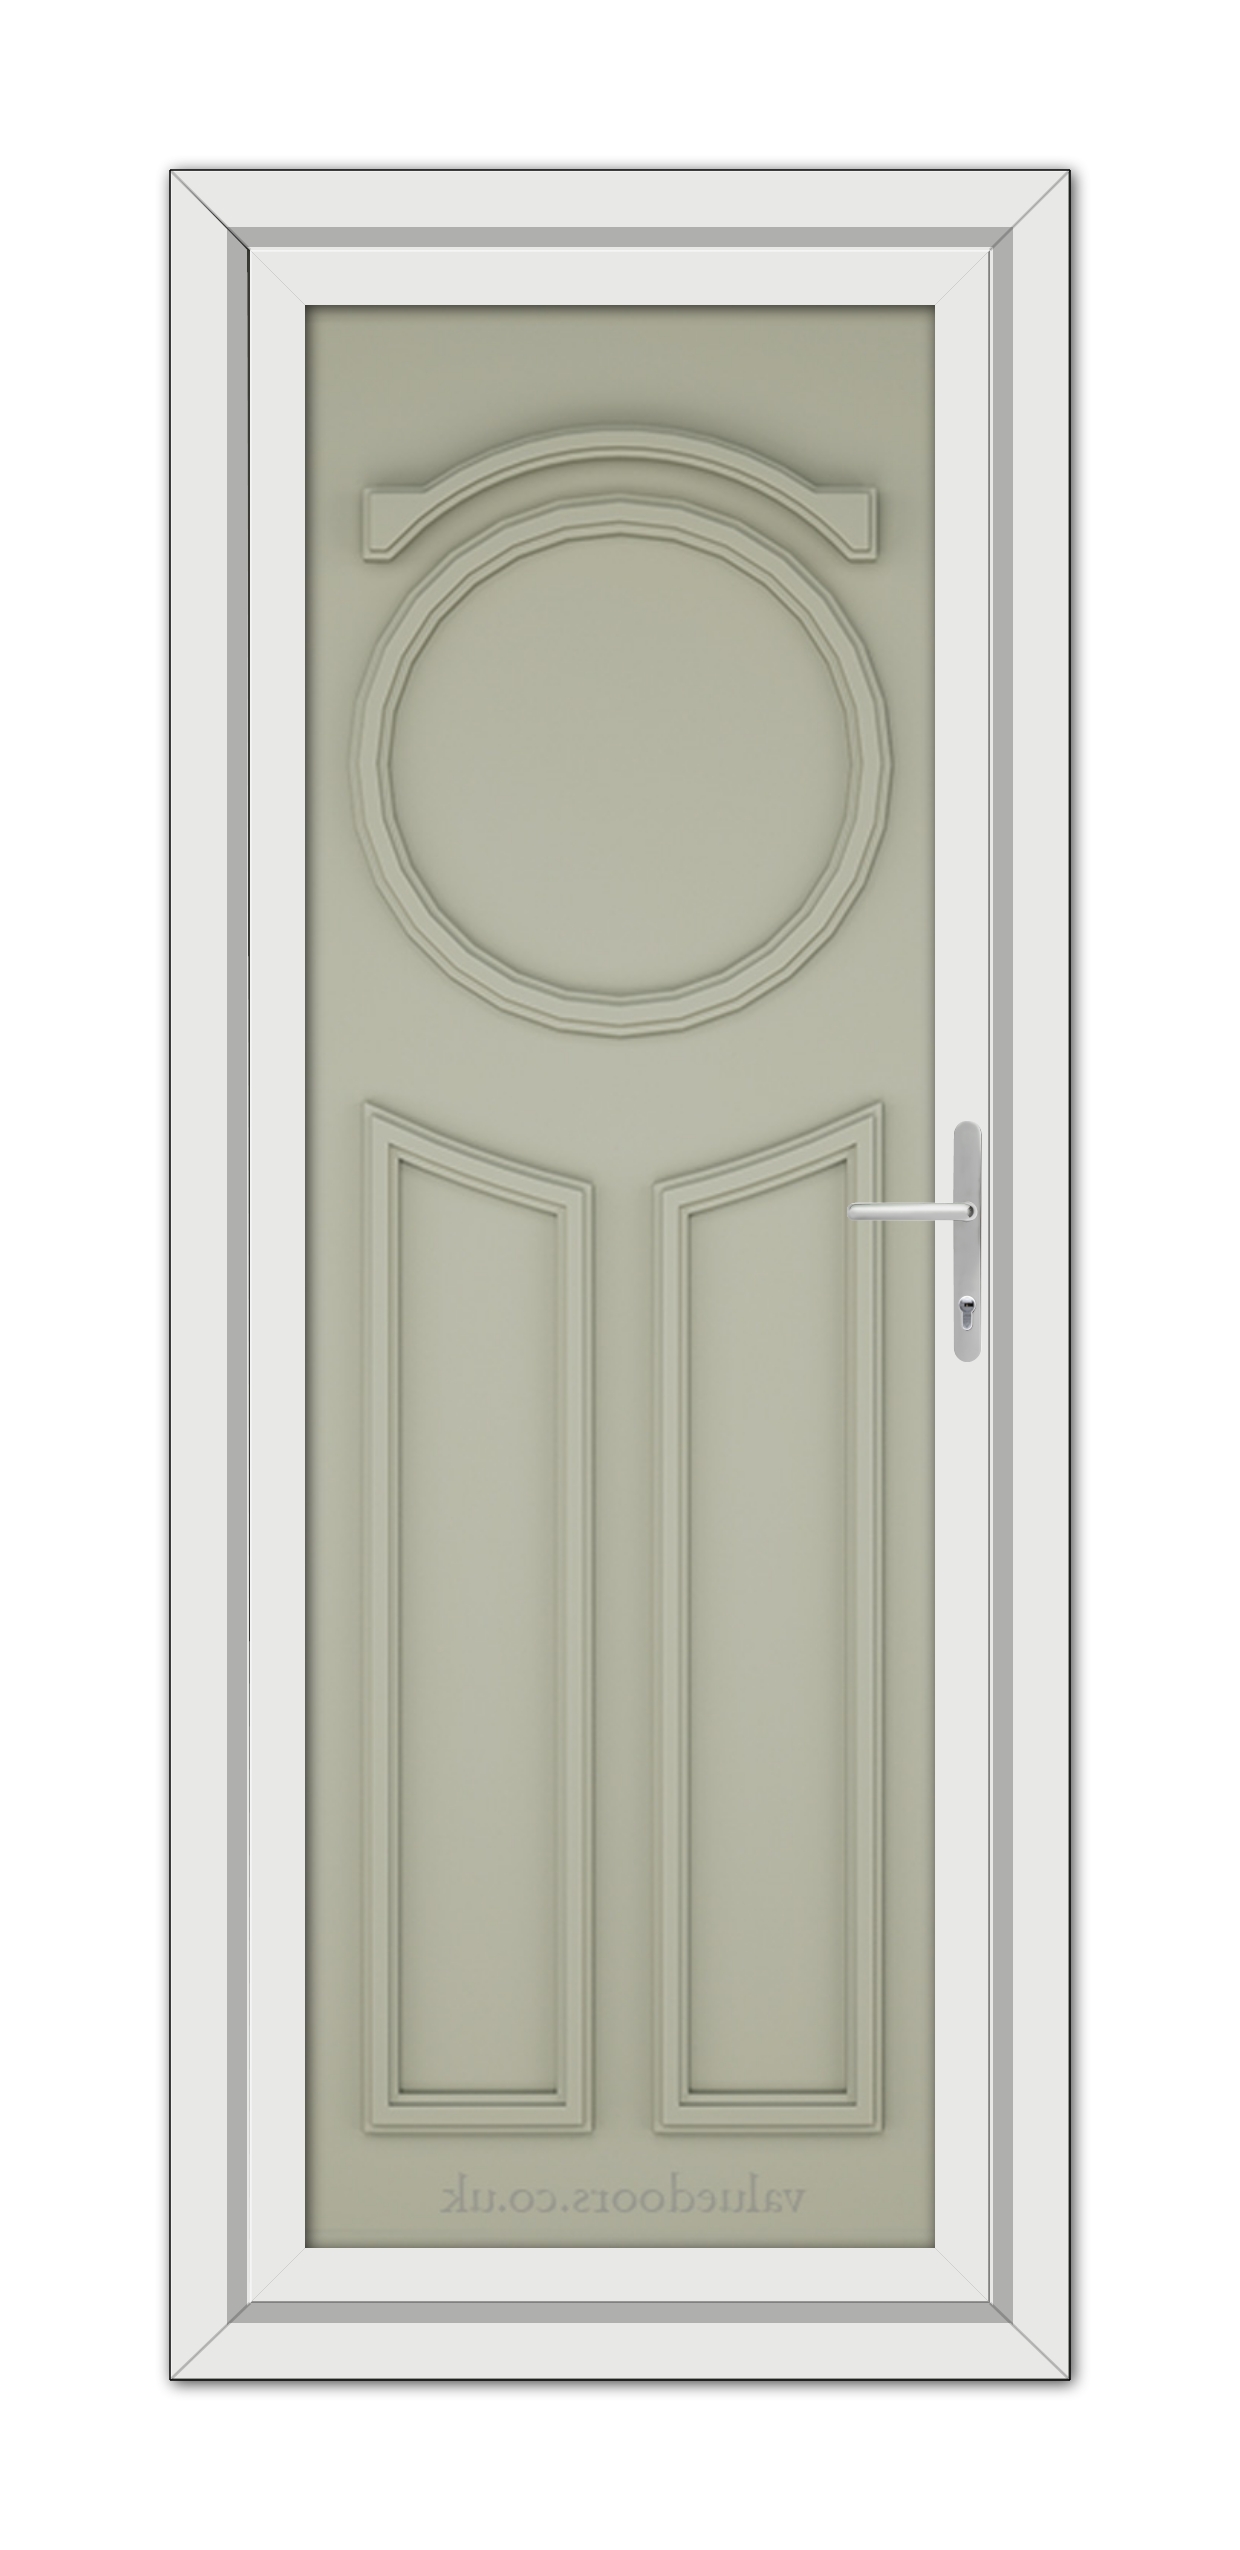 A Agate Grey Blenheim Solid uPVC Door with a circular window at the top, featuring a modern handle on the right side, set within a white frame.